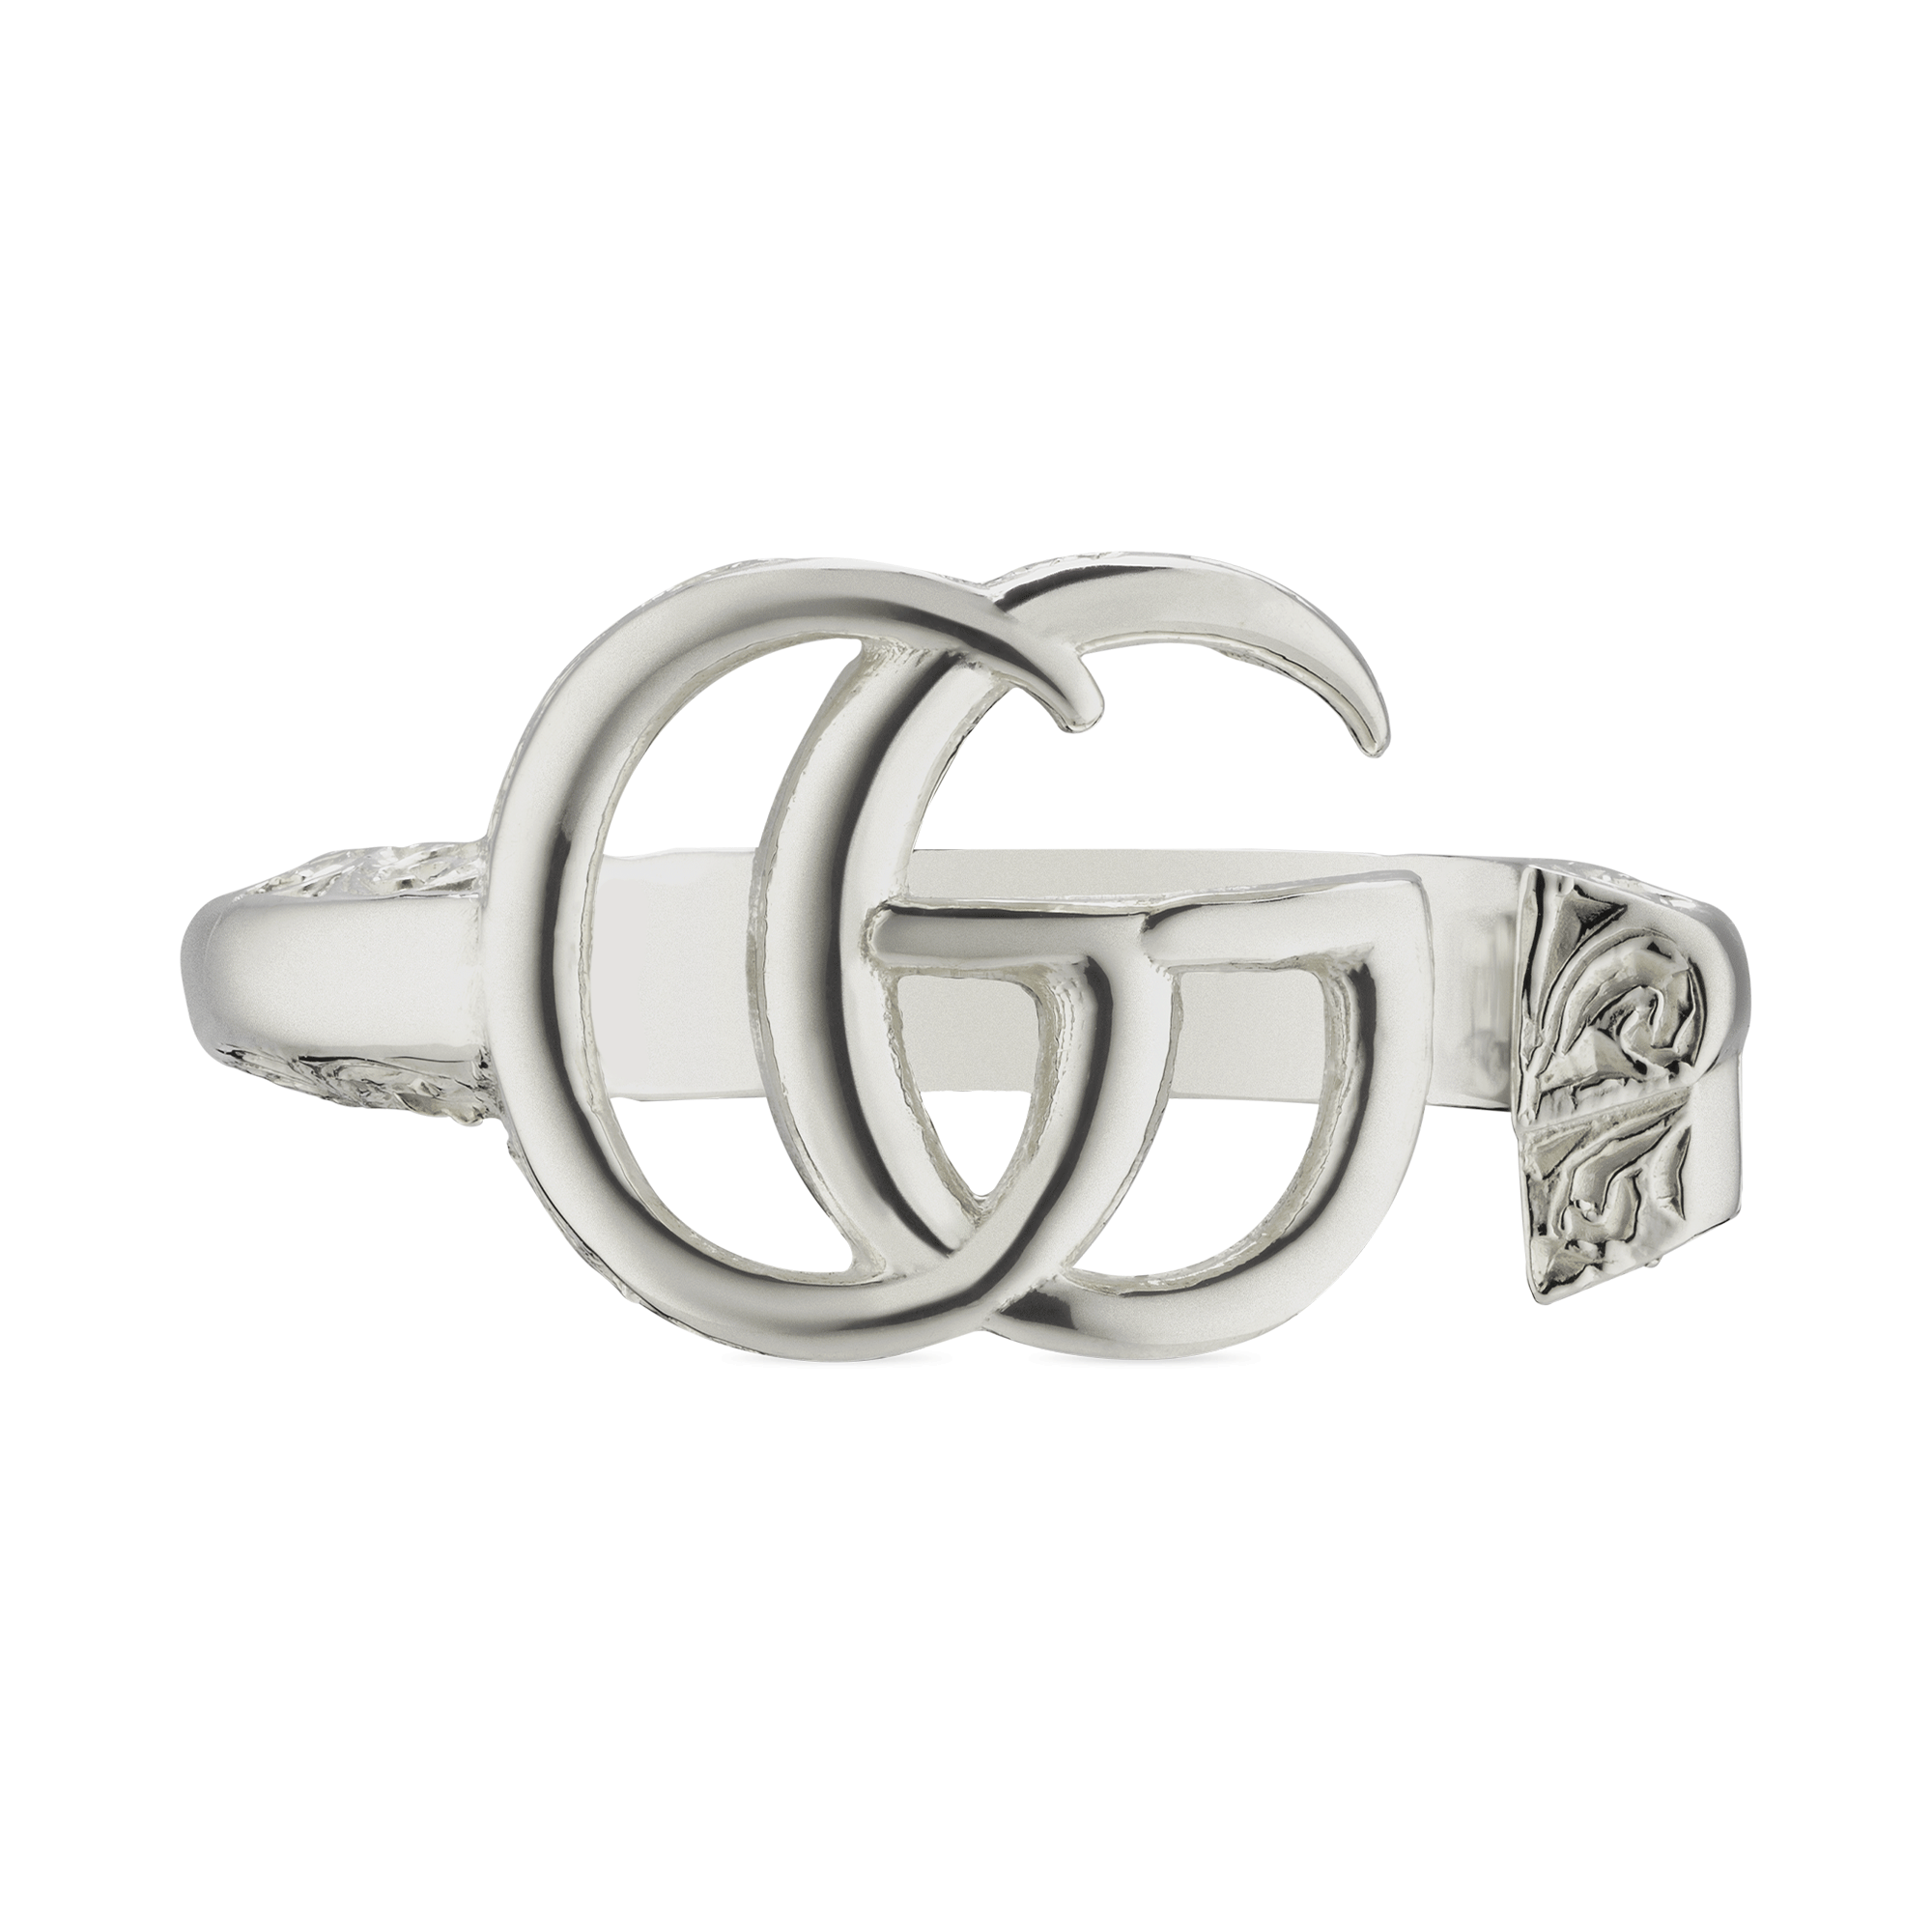 GG Marmont Sterling Silver Polished Double G Key Ring